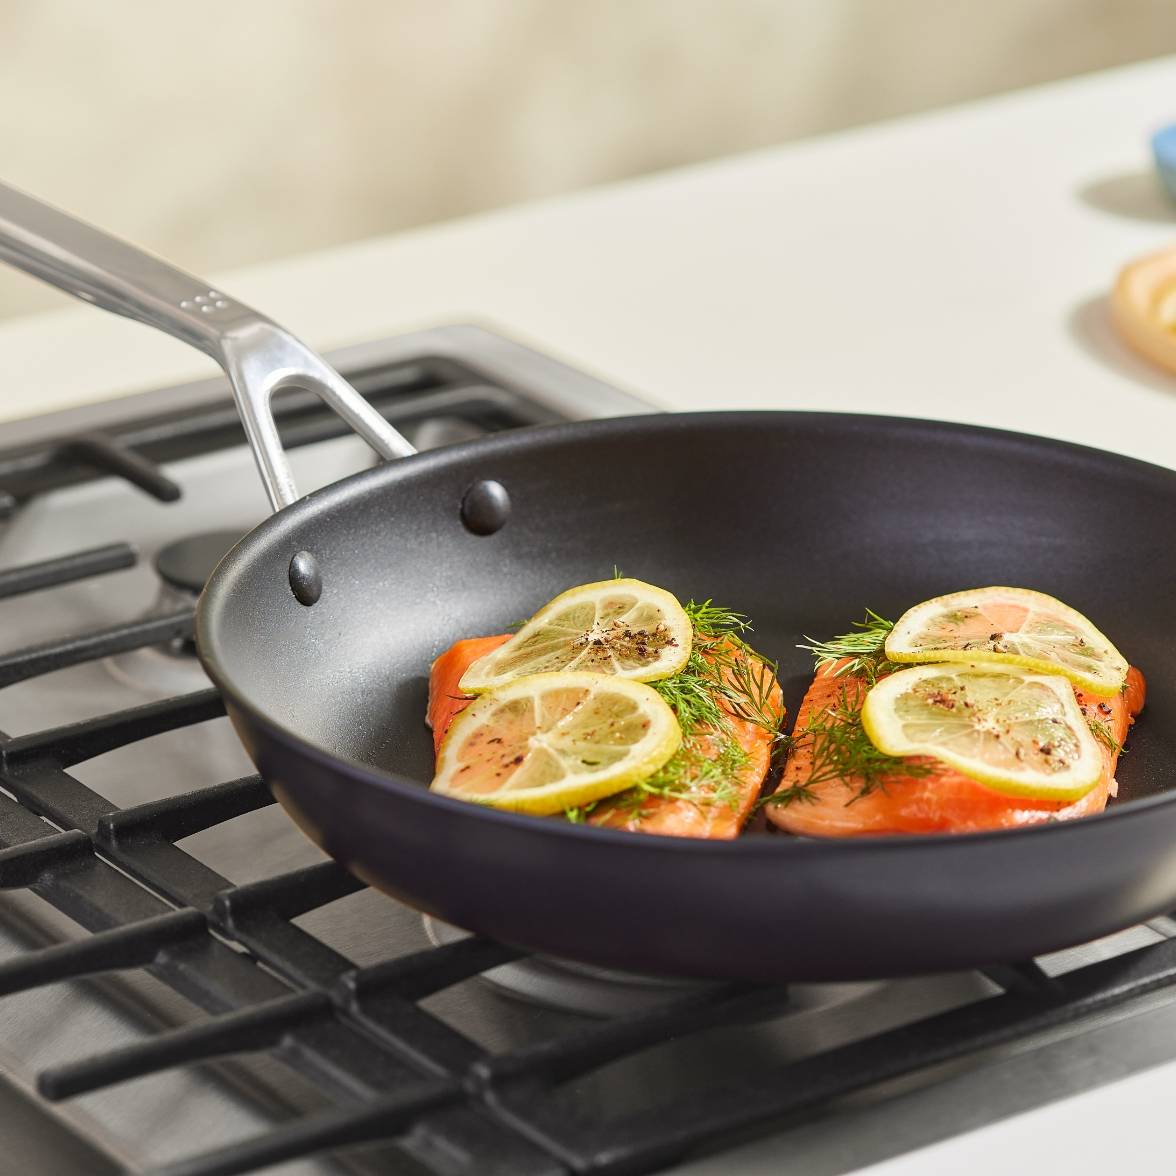 Two salmon filets topped with herbs and sliced lemon sit in a Misen Nonstick Pan on a stovetop.